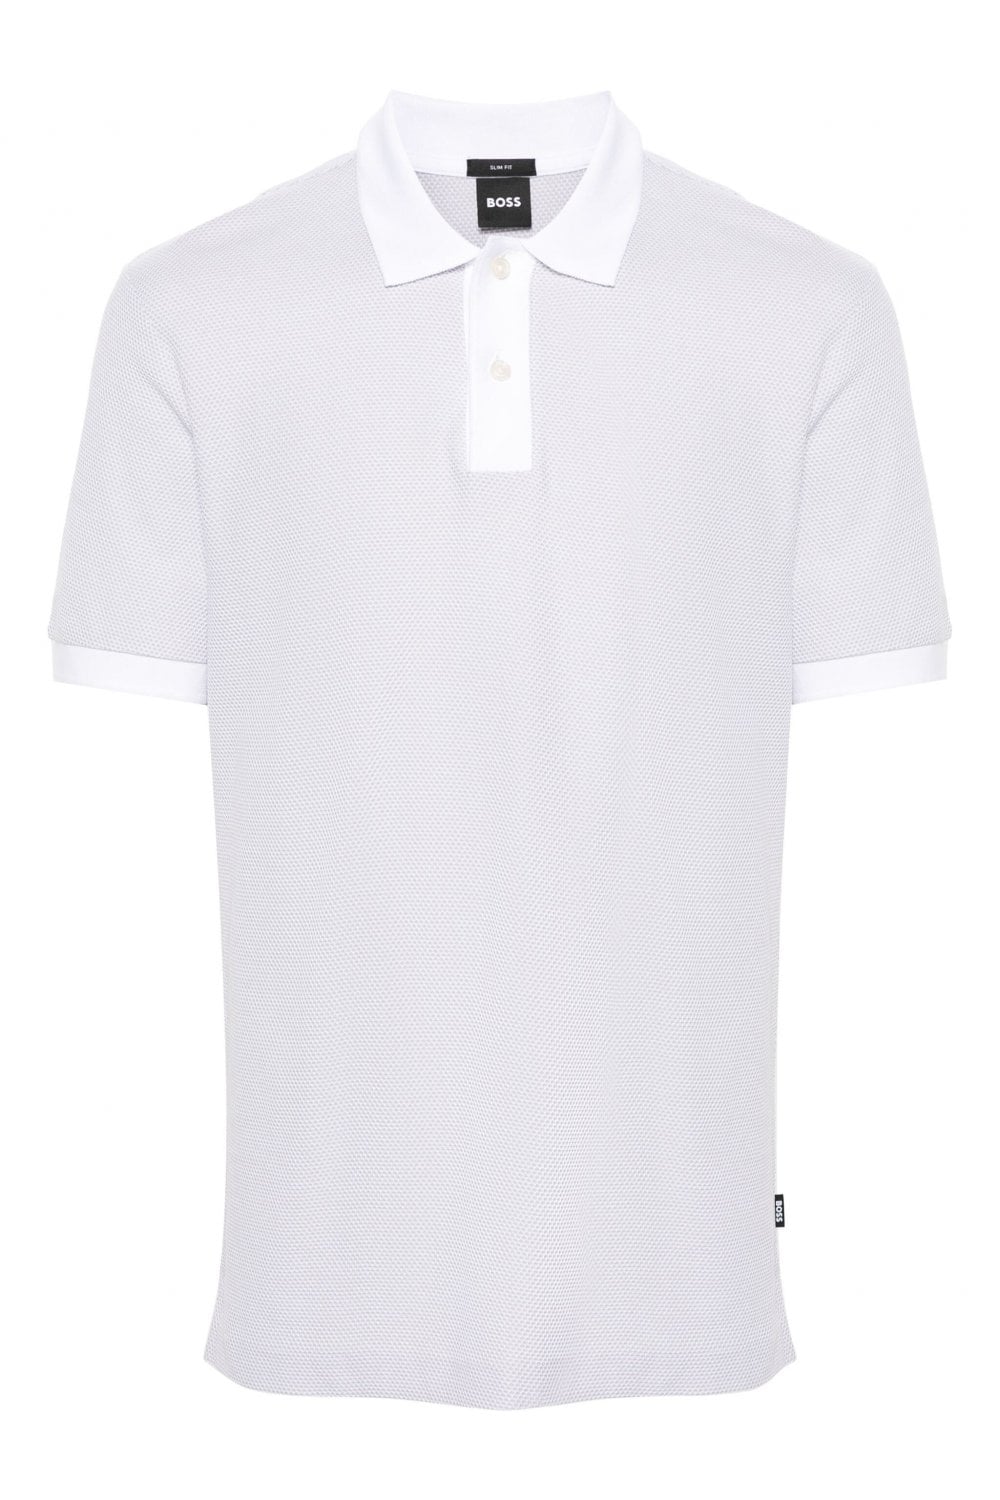 BOSS - PHILLIPSON 37 Silver White SLIM FIT Two Tone Polo Shirt 50513580 100